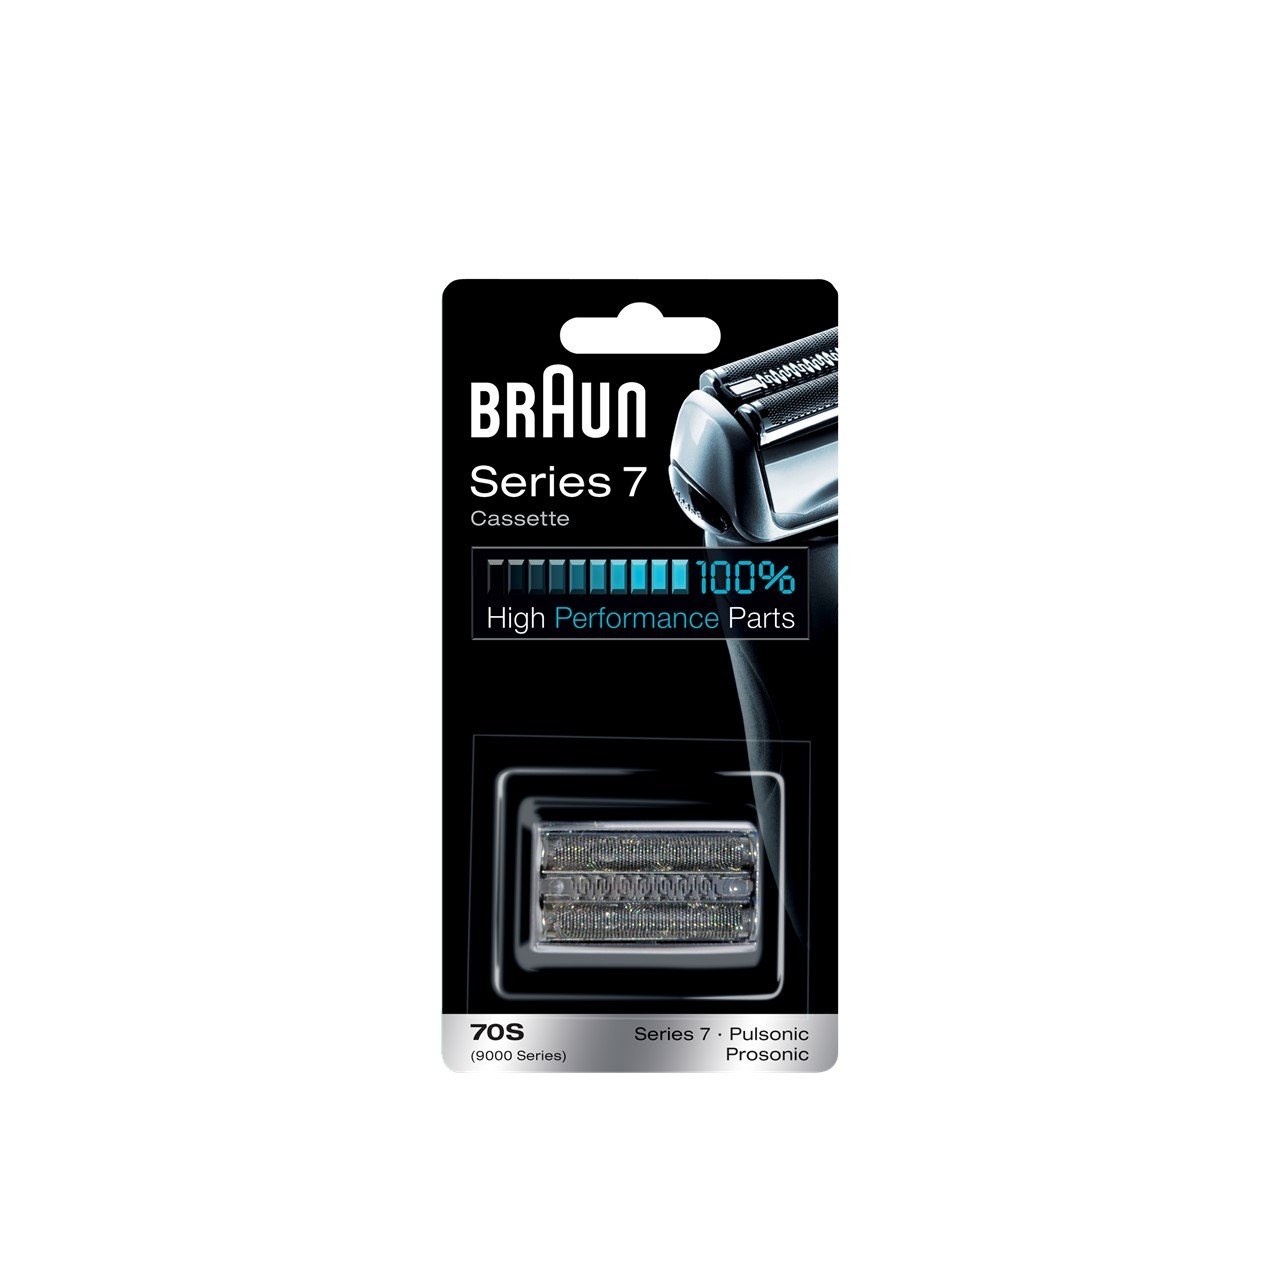 Braun Series 7 Electric Shaver Cassette Replacement 70S